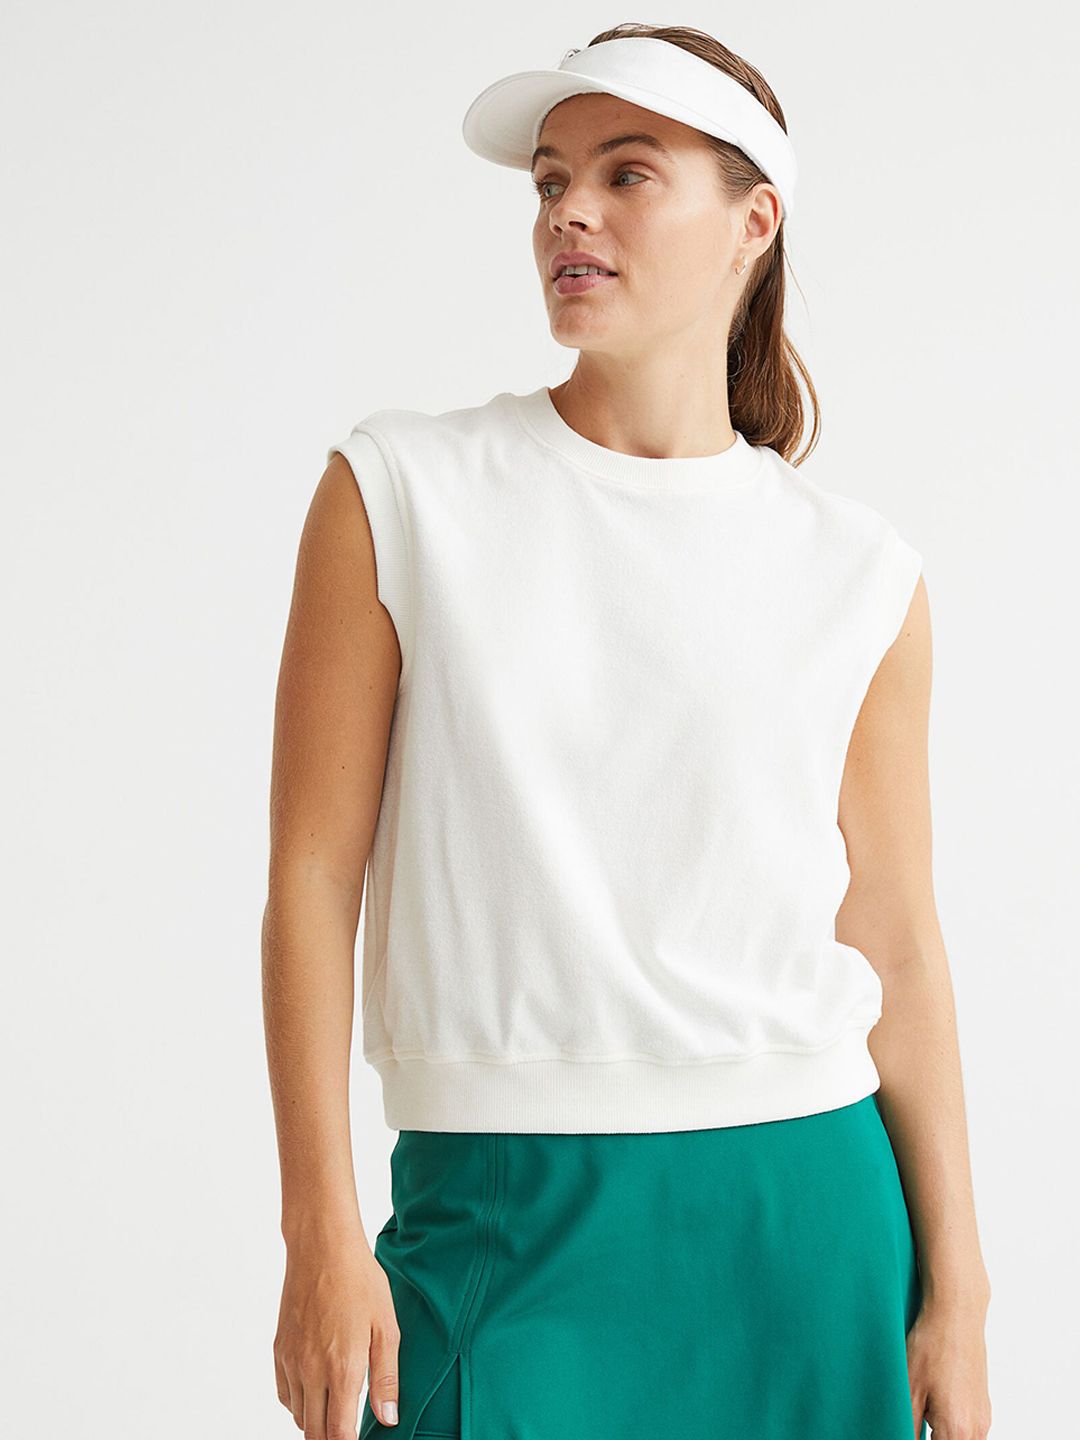 H&M Women White Solid Sports Sweater Vest Price in India